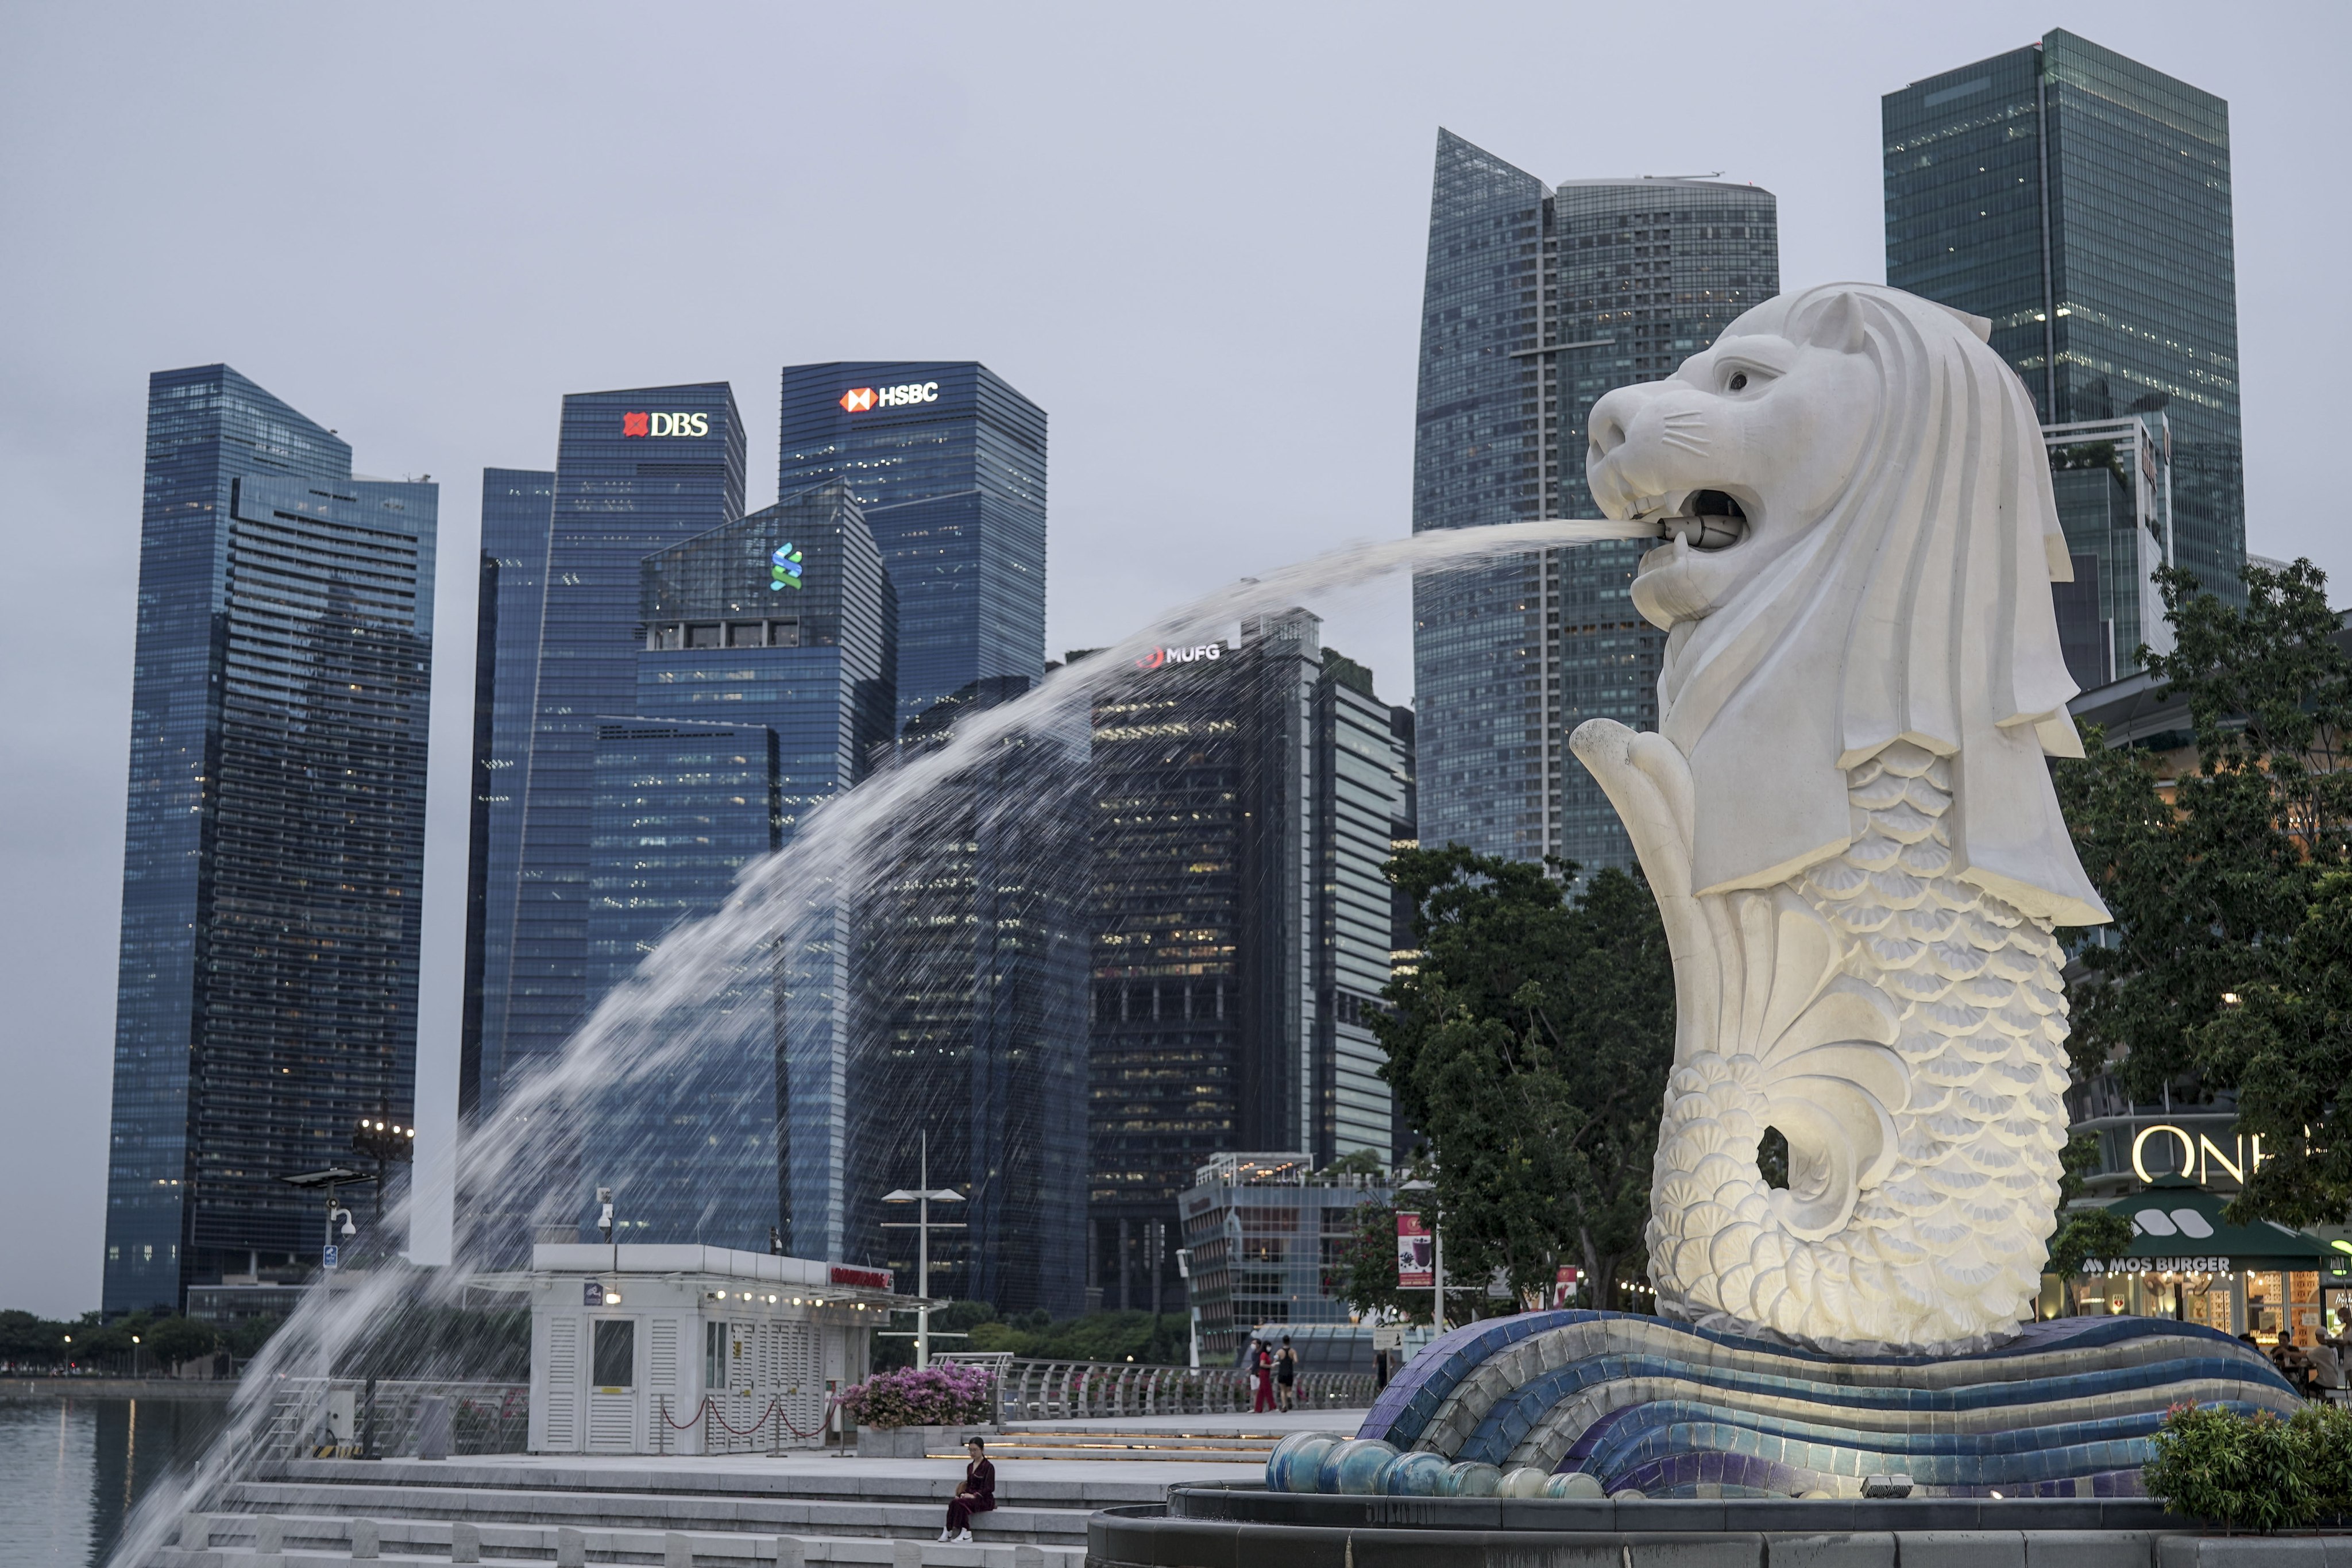 The Merlion statue with buildings of Singapore’s financial district behind. For causing hurt to a vulnerable person, the accused could have been jailed for up to six years under the city state’s laws. Photo: EPA-EFE